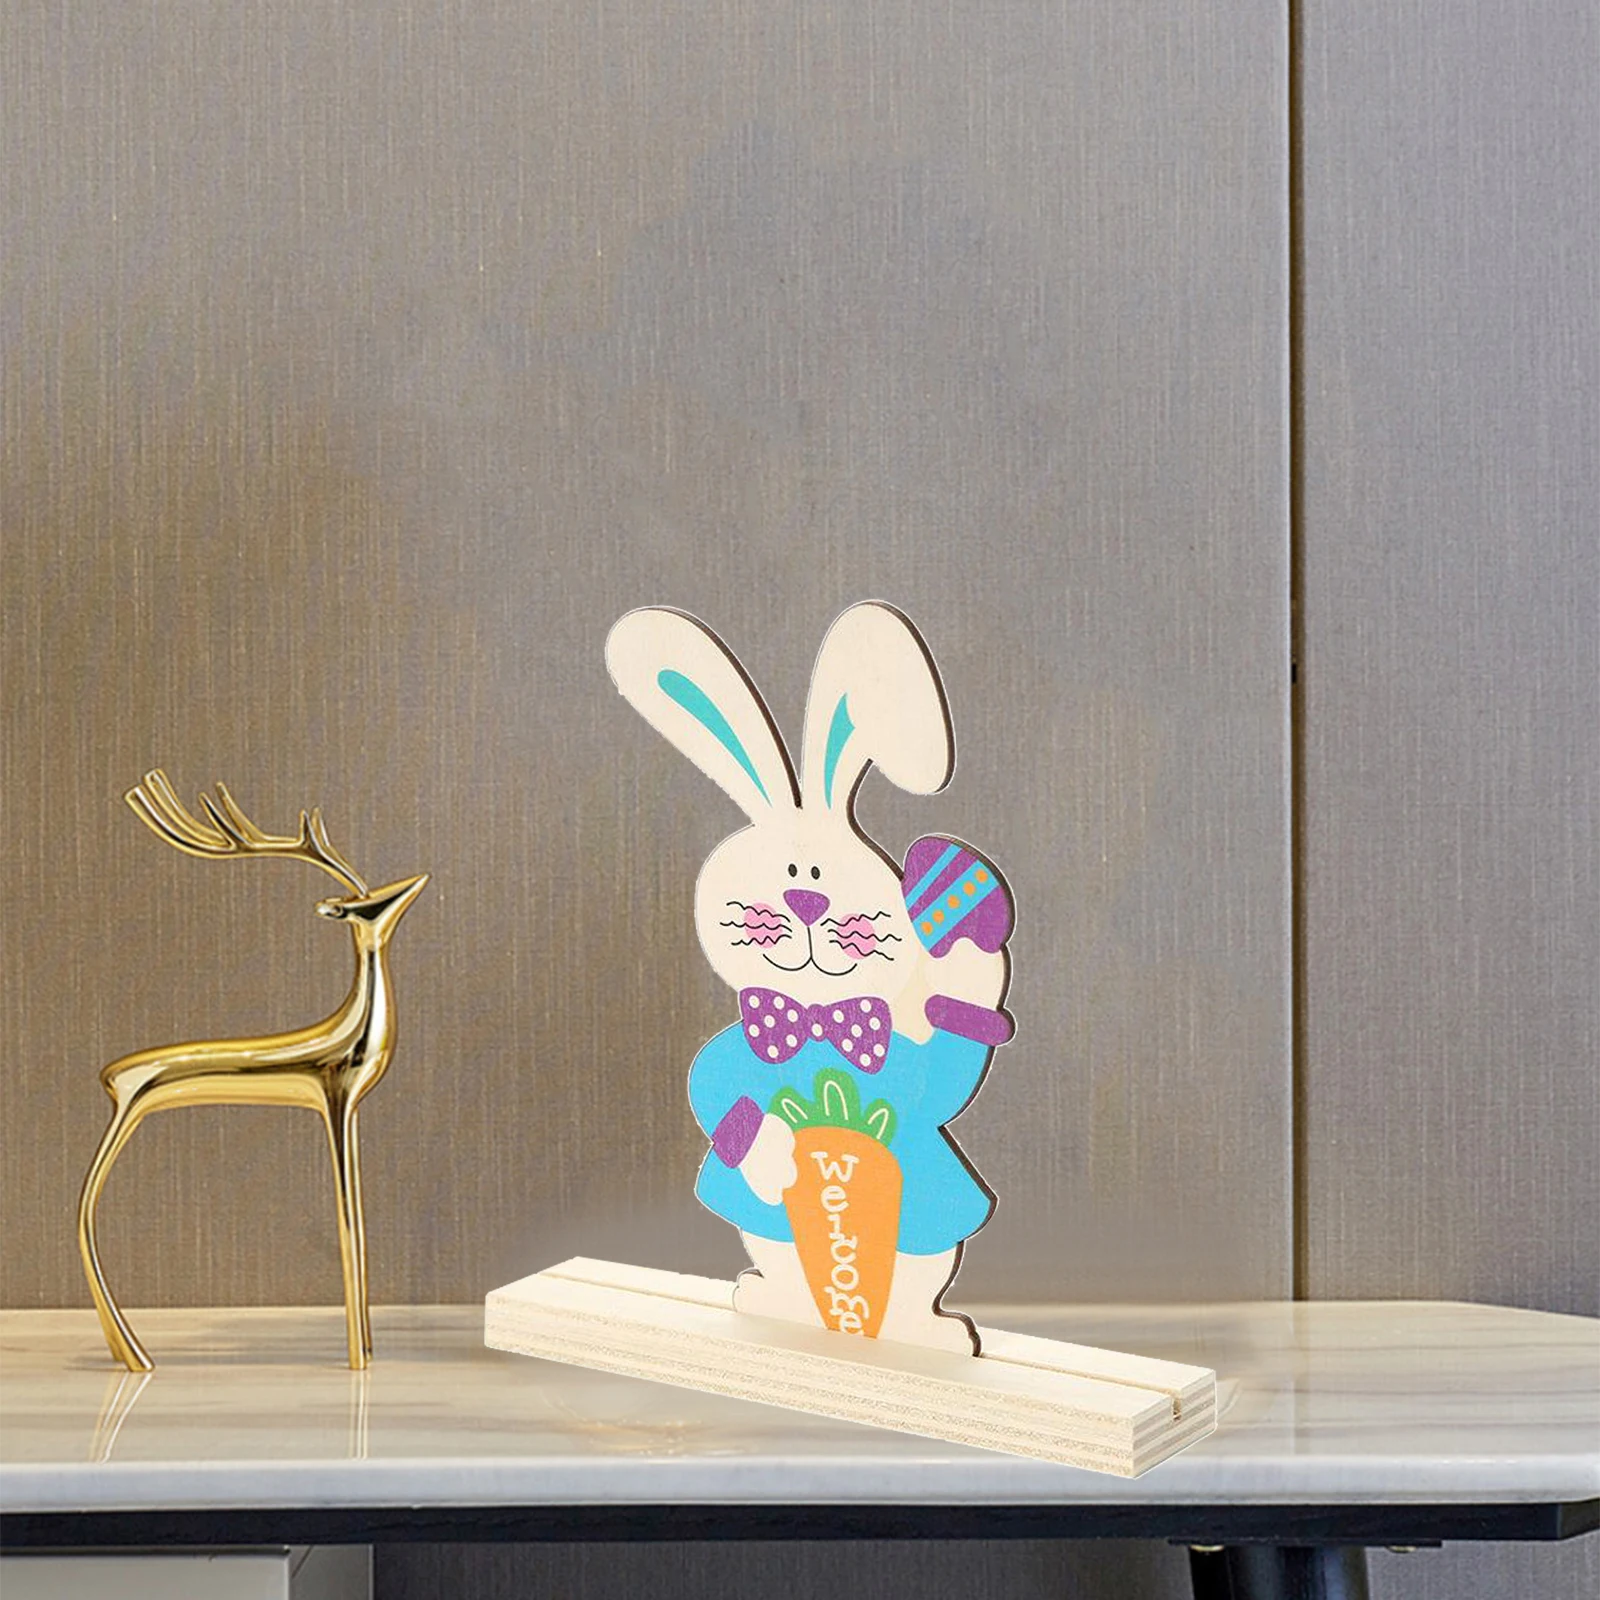 Standing Wooden Easter Bunny Ornament Cut Out Wood Spring Bunny Gifts for Inside Home Party Table Top